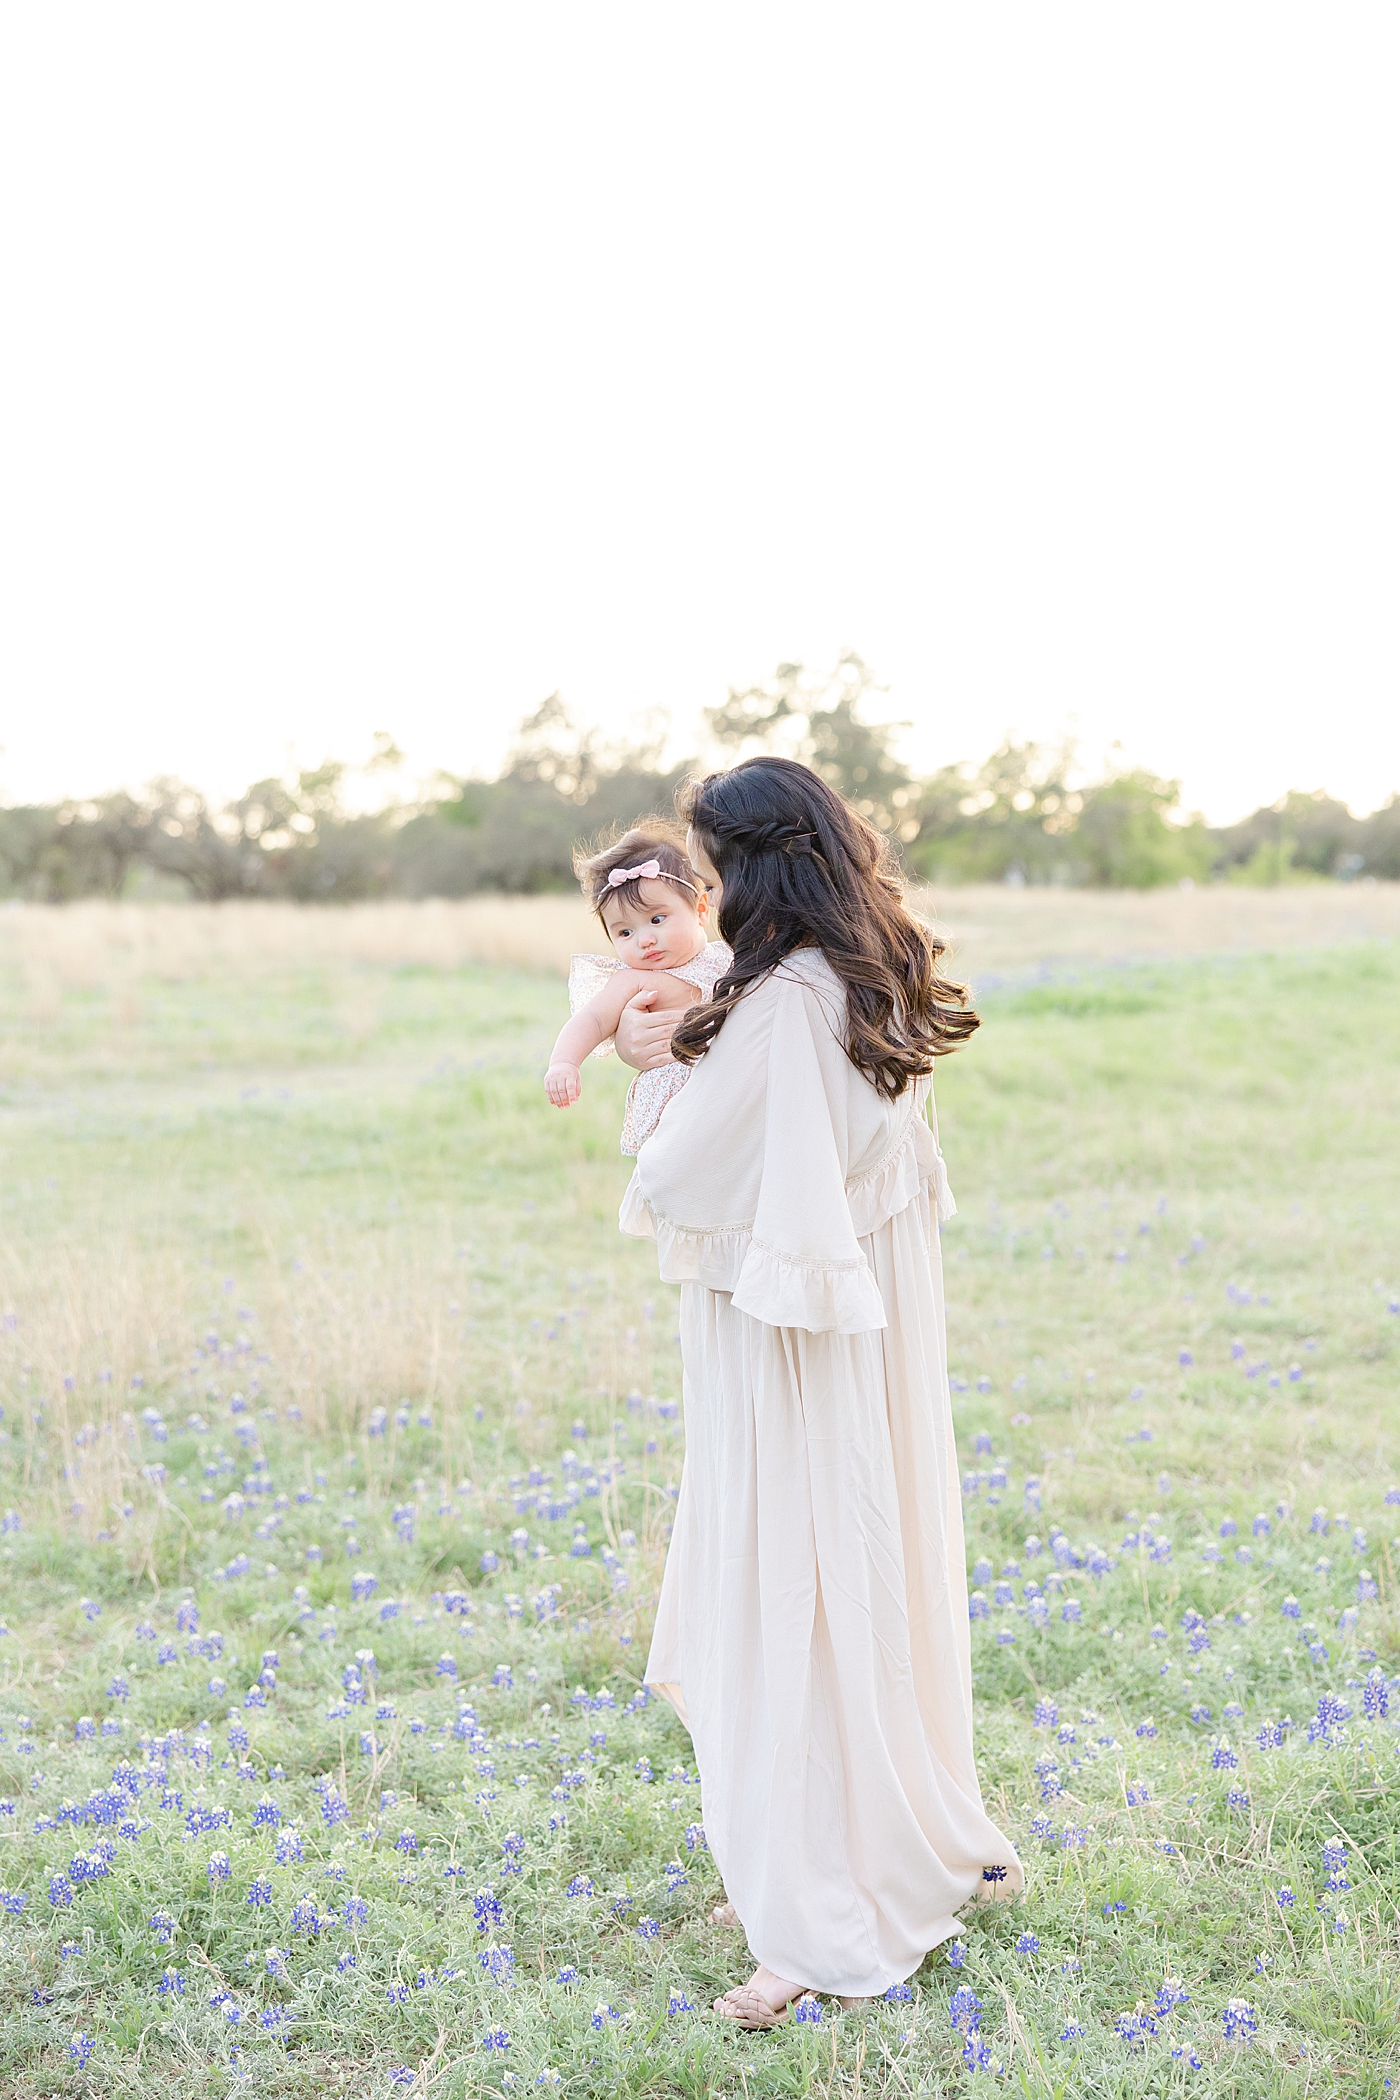 during their Milestone Session with Texas Bluebonnets | Image by Sana Ahmed